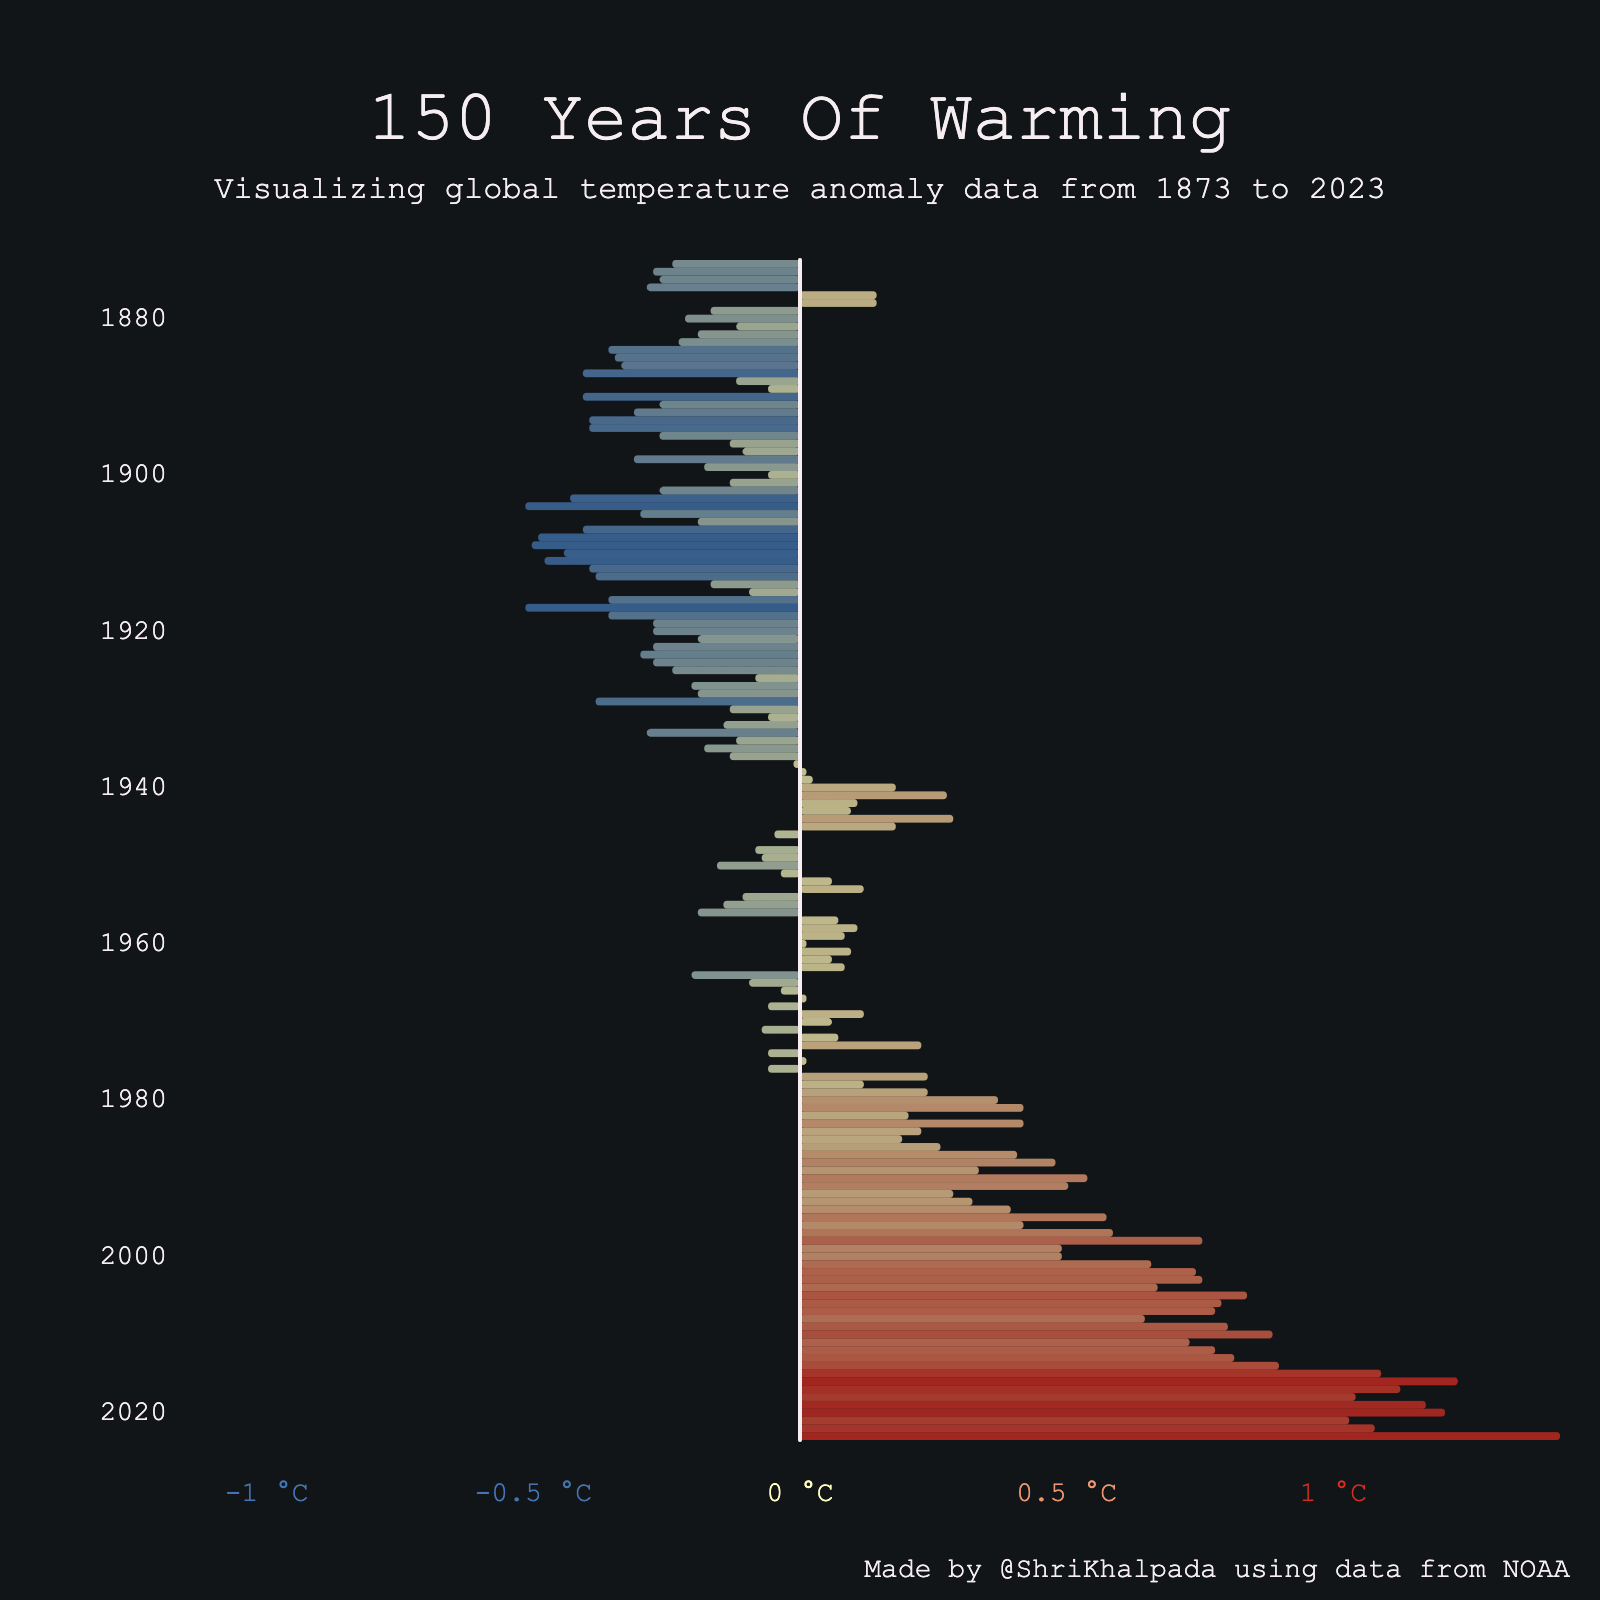 A temperature anomaly bar chart from 1873 to 2023 titled "150 Years Of Warming," showing the changes in global temperatures over time, with cooler years in blue and warmer years in red.